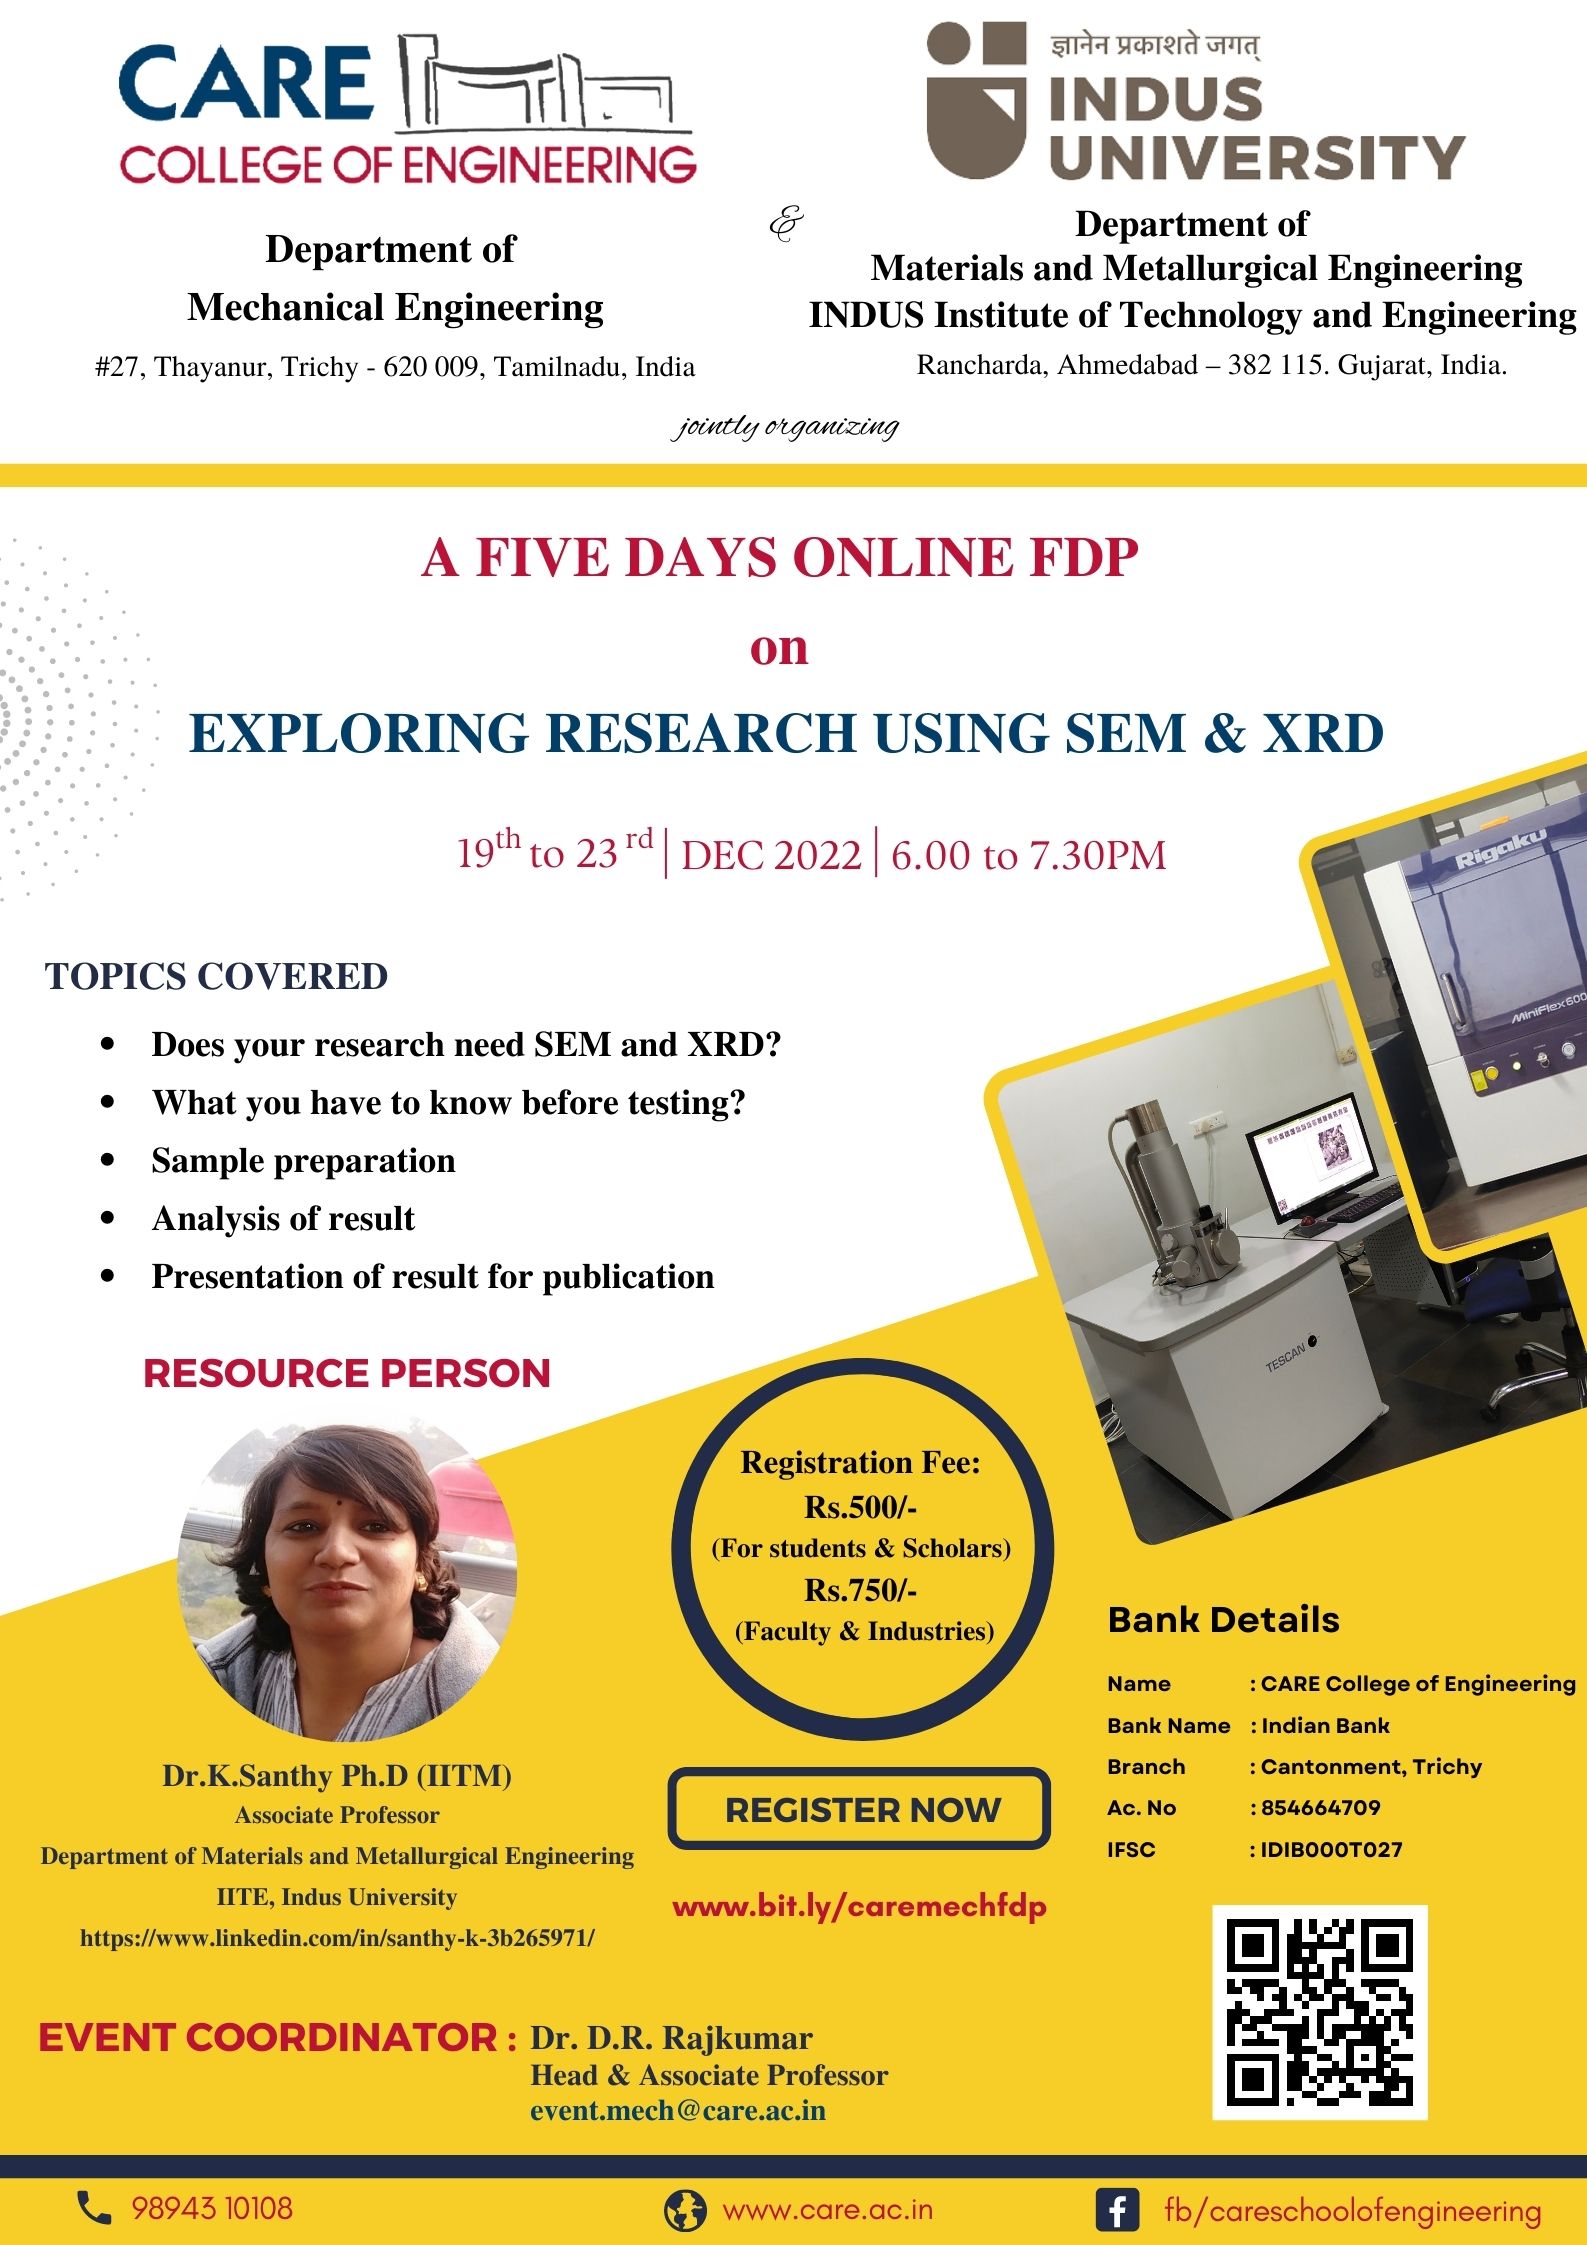 A Five days Online FDP on Exploring Research using SEM & XRD 2022